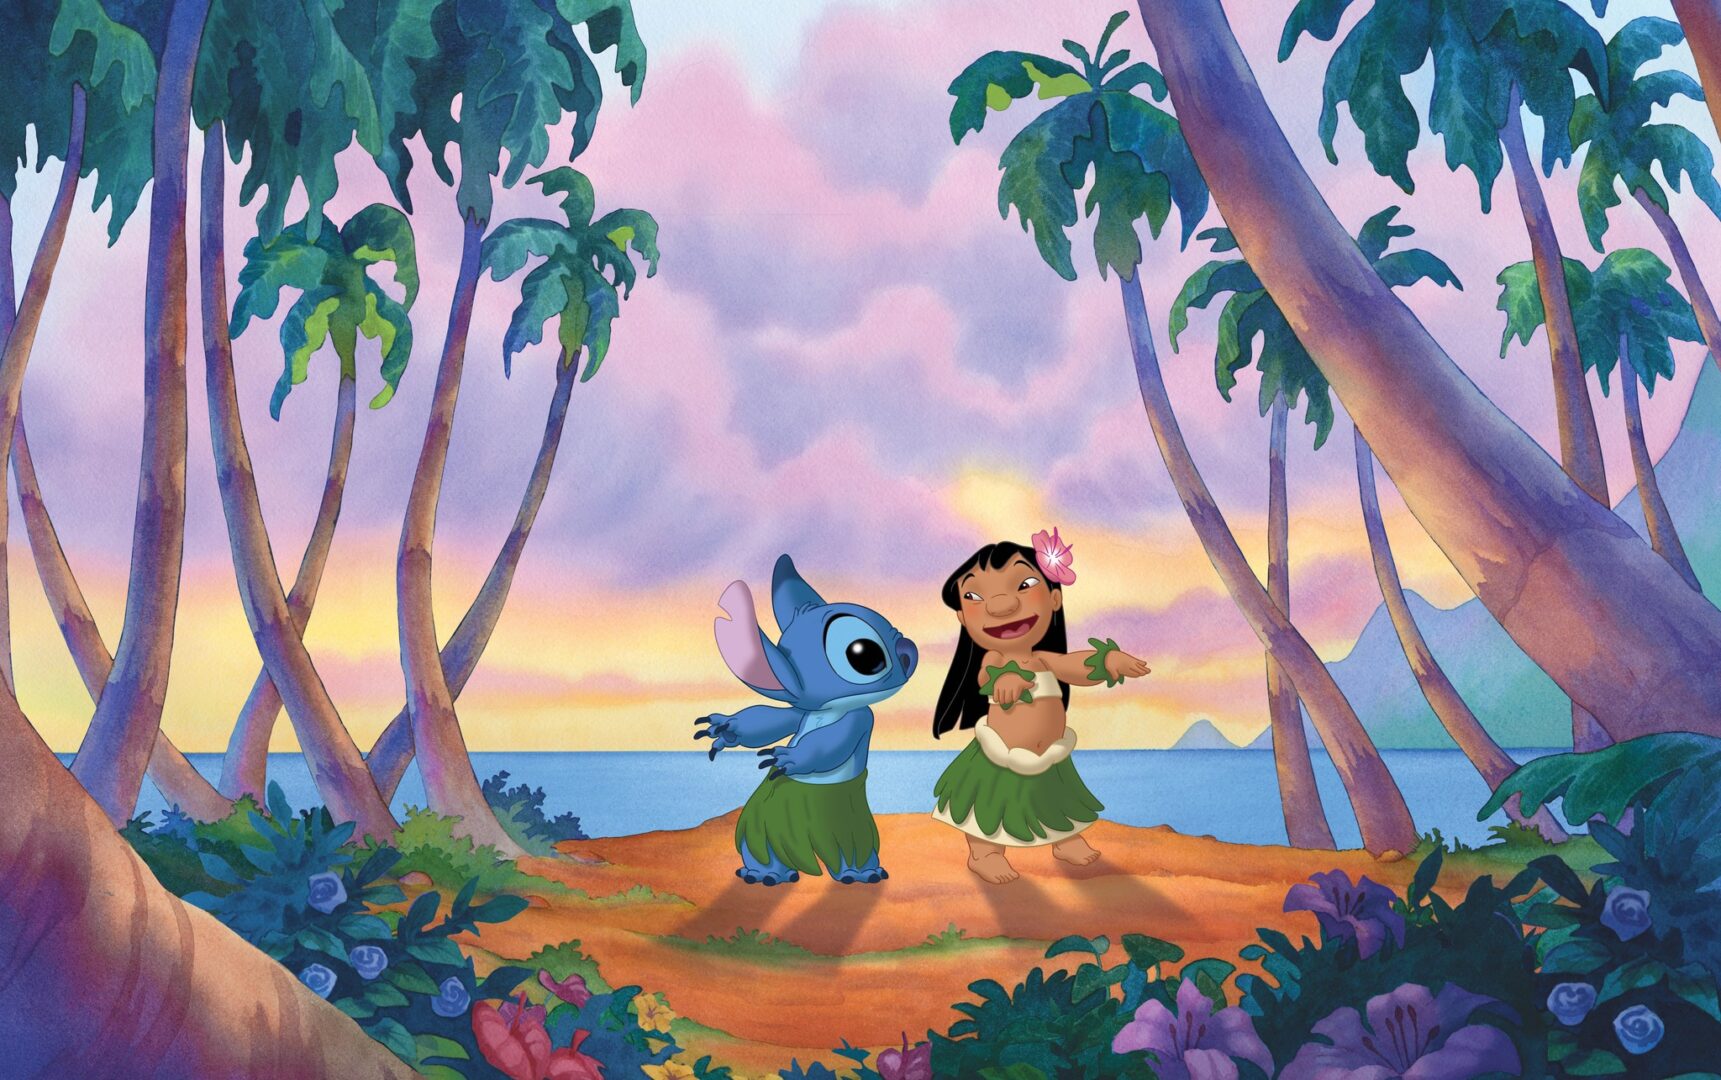 Lilo has been Cast in Disney Live-Action Lilo and Stitch Movie